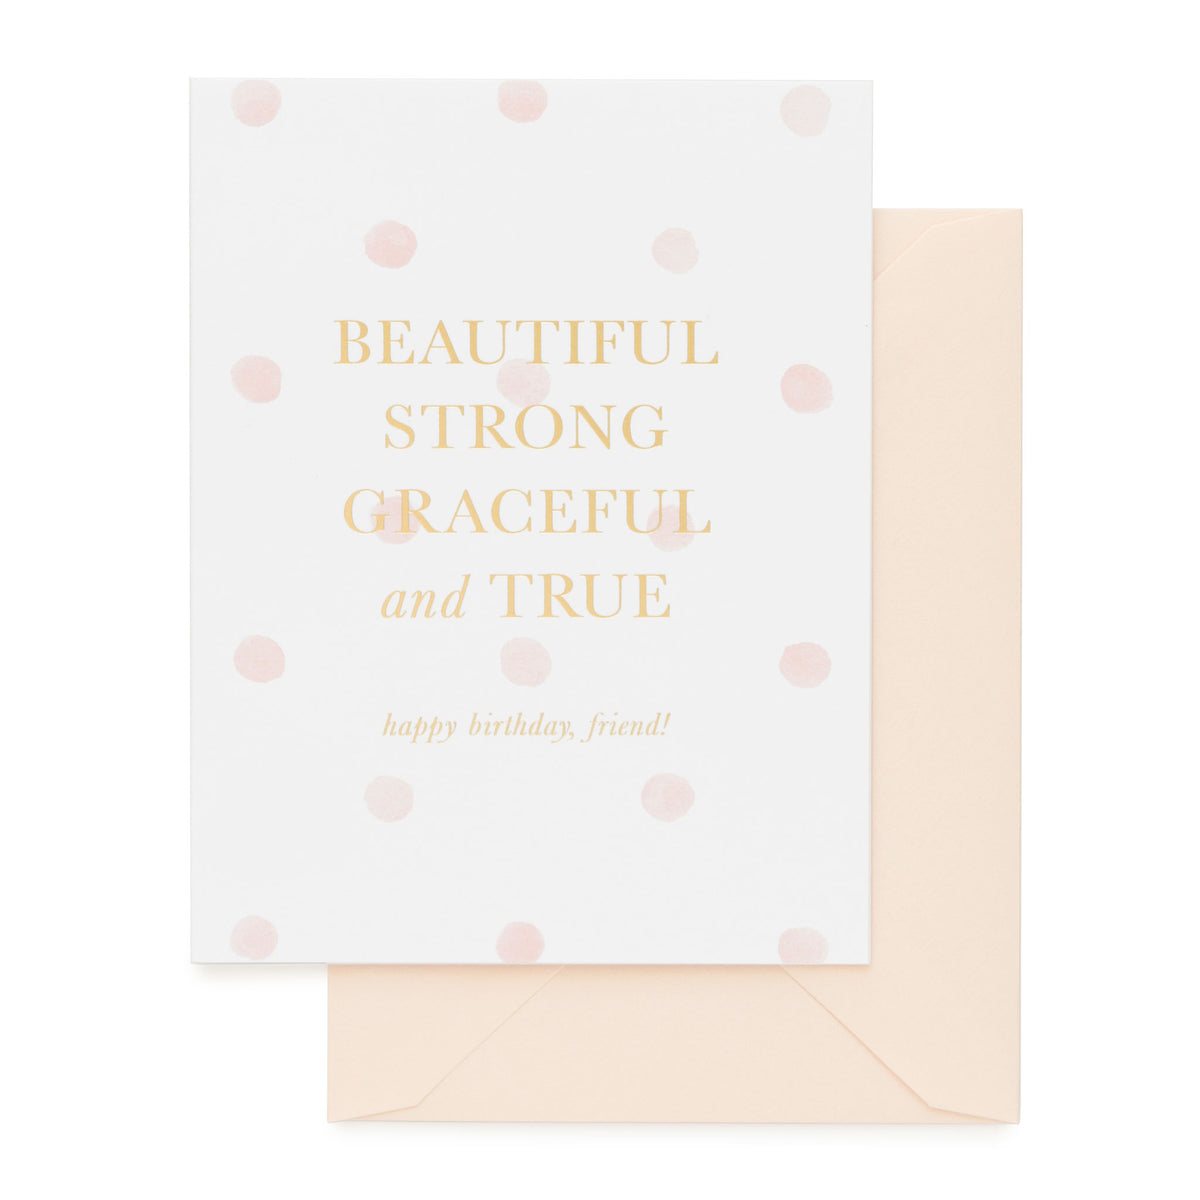 Pink and white birthday card with Beautiful Strong Graceful and True printed in gold